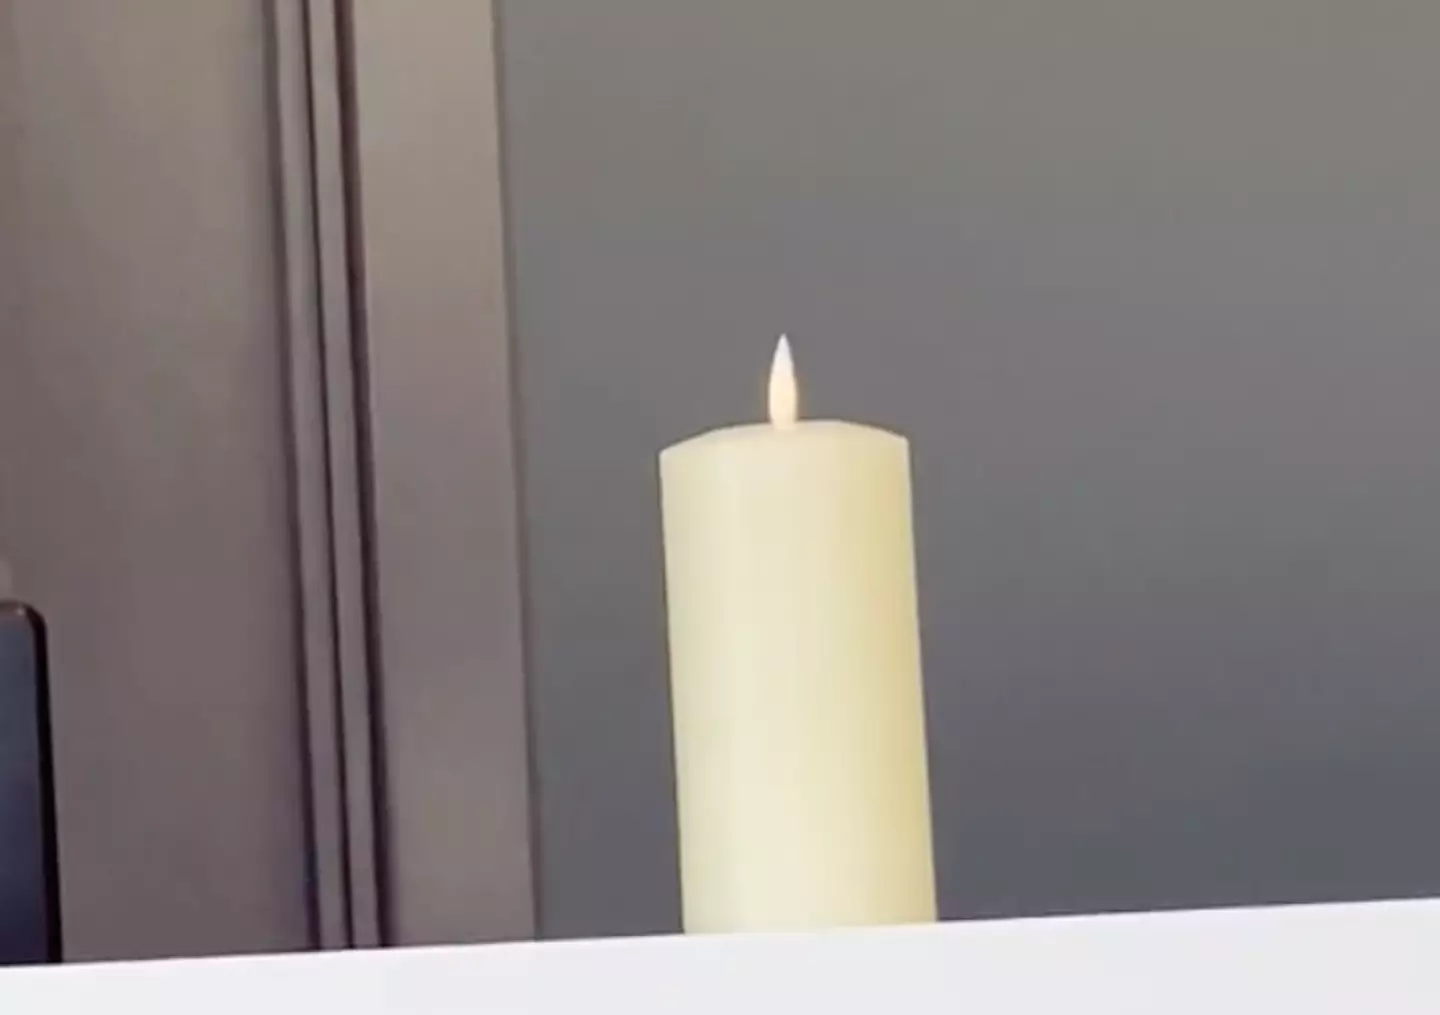 A candle was lit on the reception desk.